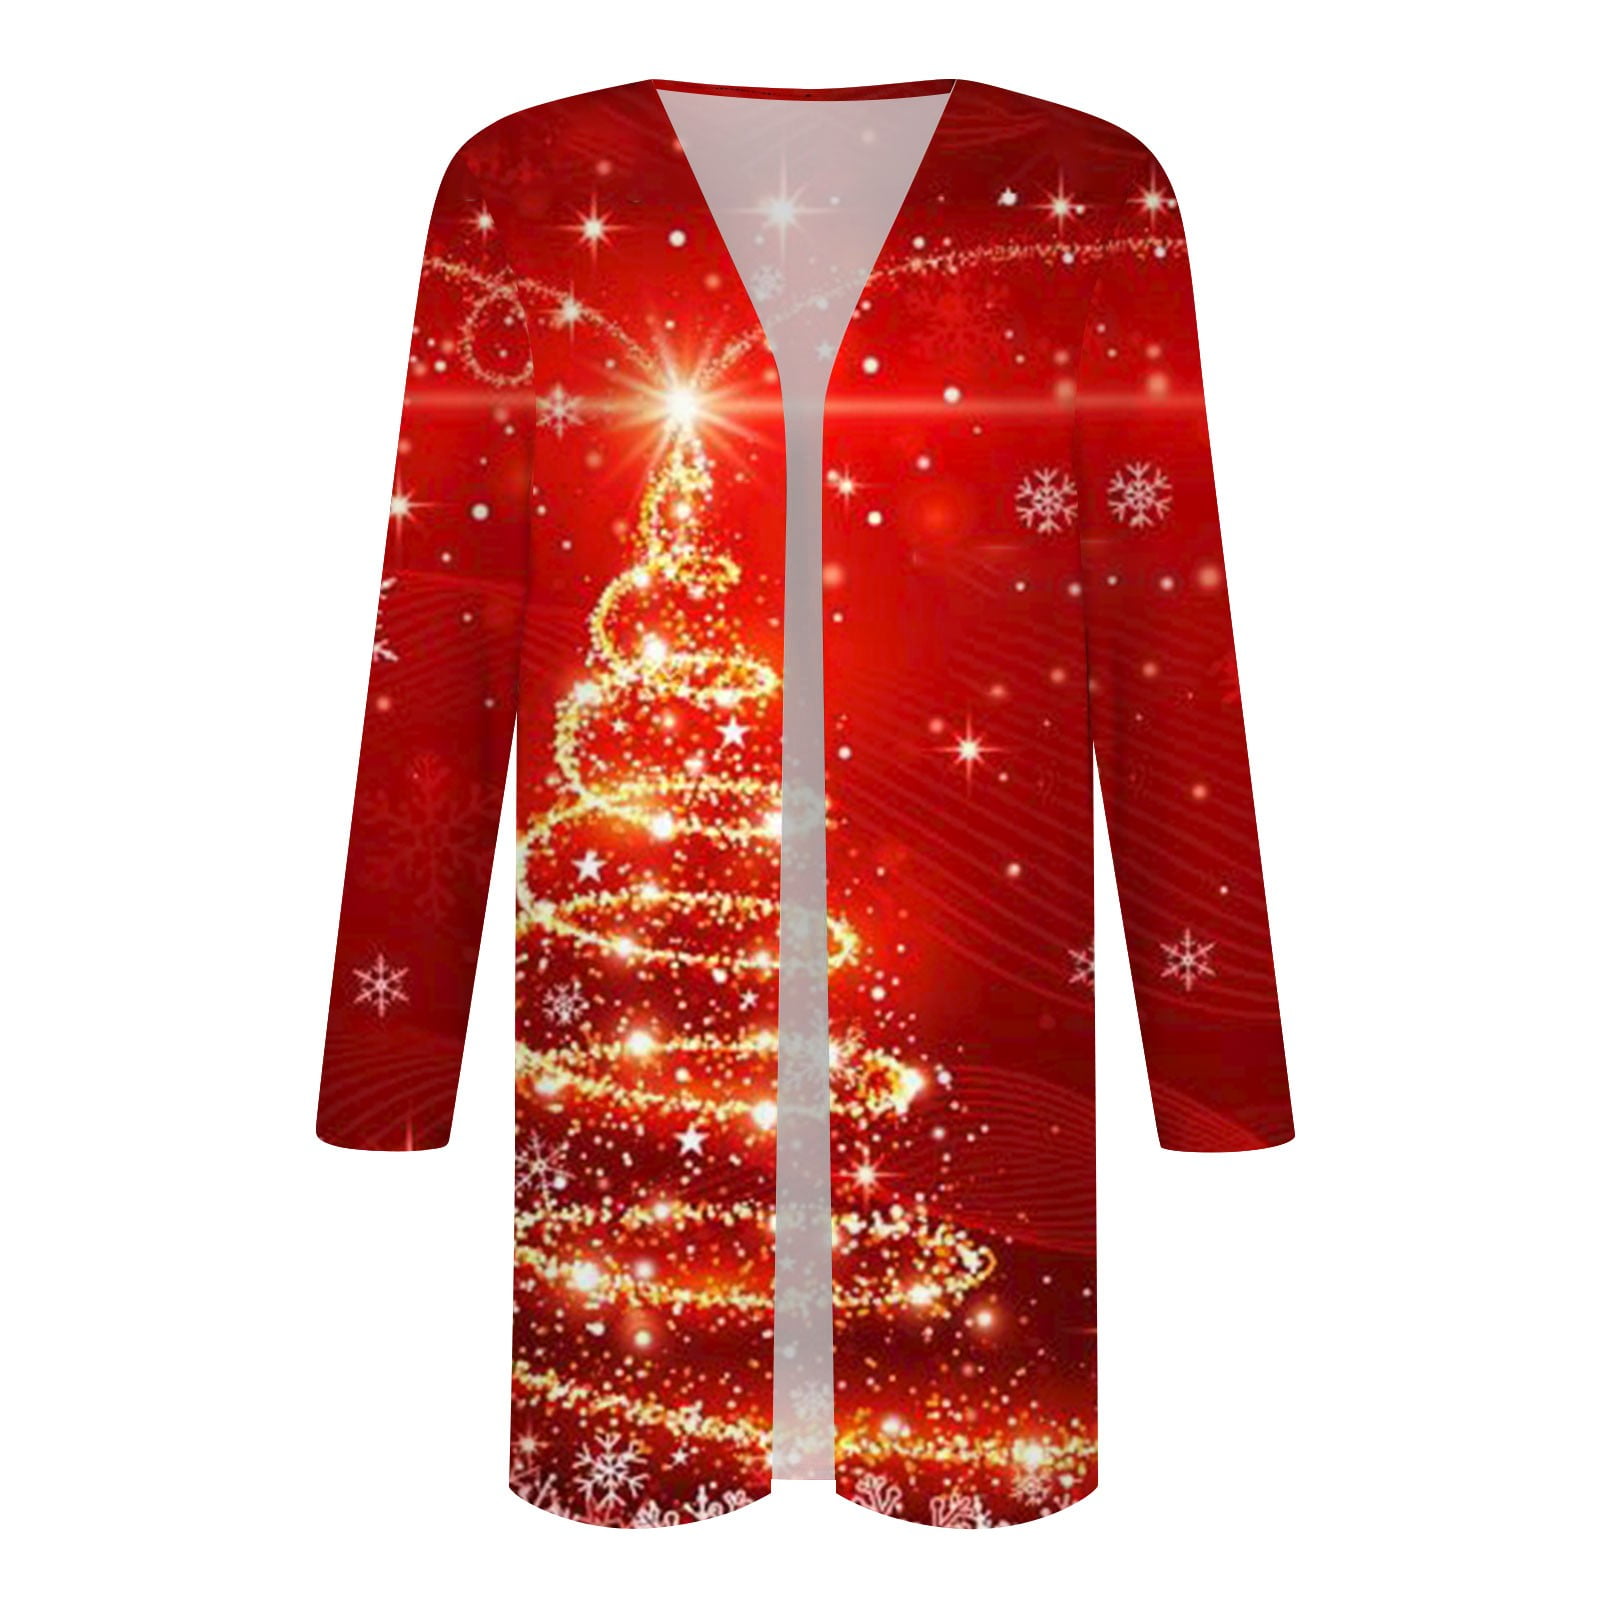 Work Sleeve Size Cardigan Long Size Plus Christmas Christmas Print Lightweight Christmas Oversized Women Susanny Clothes Plus Y2k for Women Warm Red Tree for for 3XL Front Women Open Cardigan